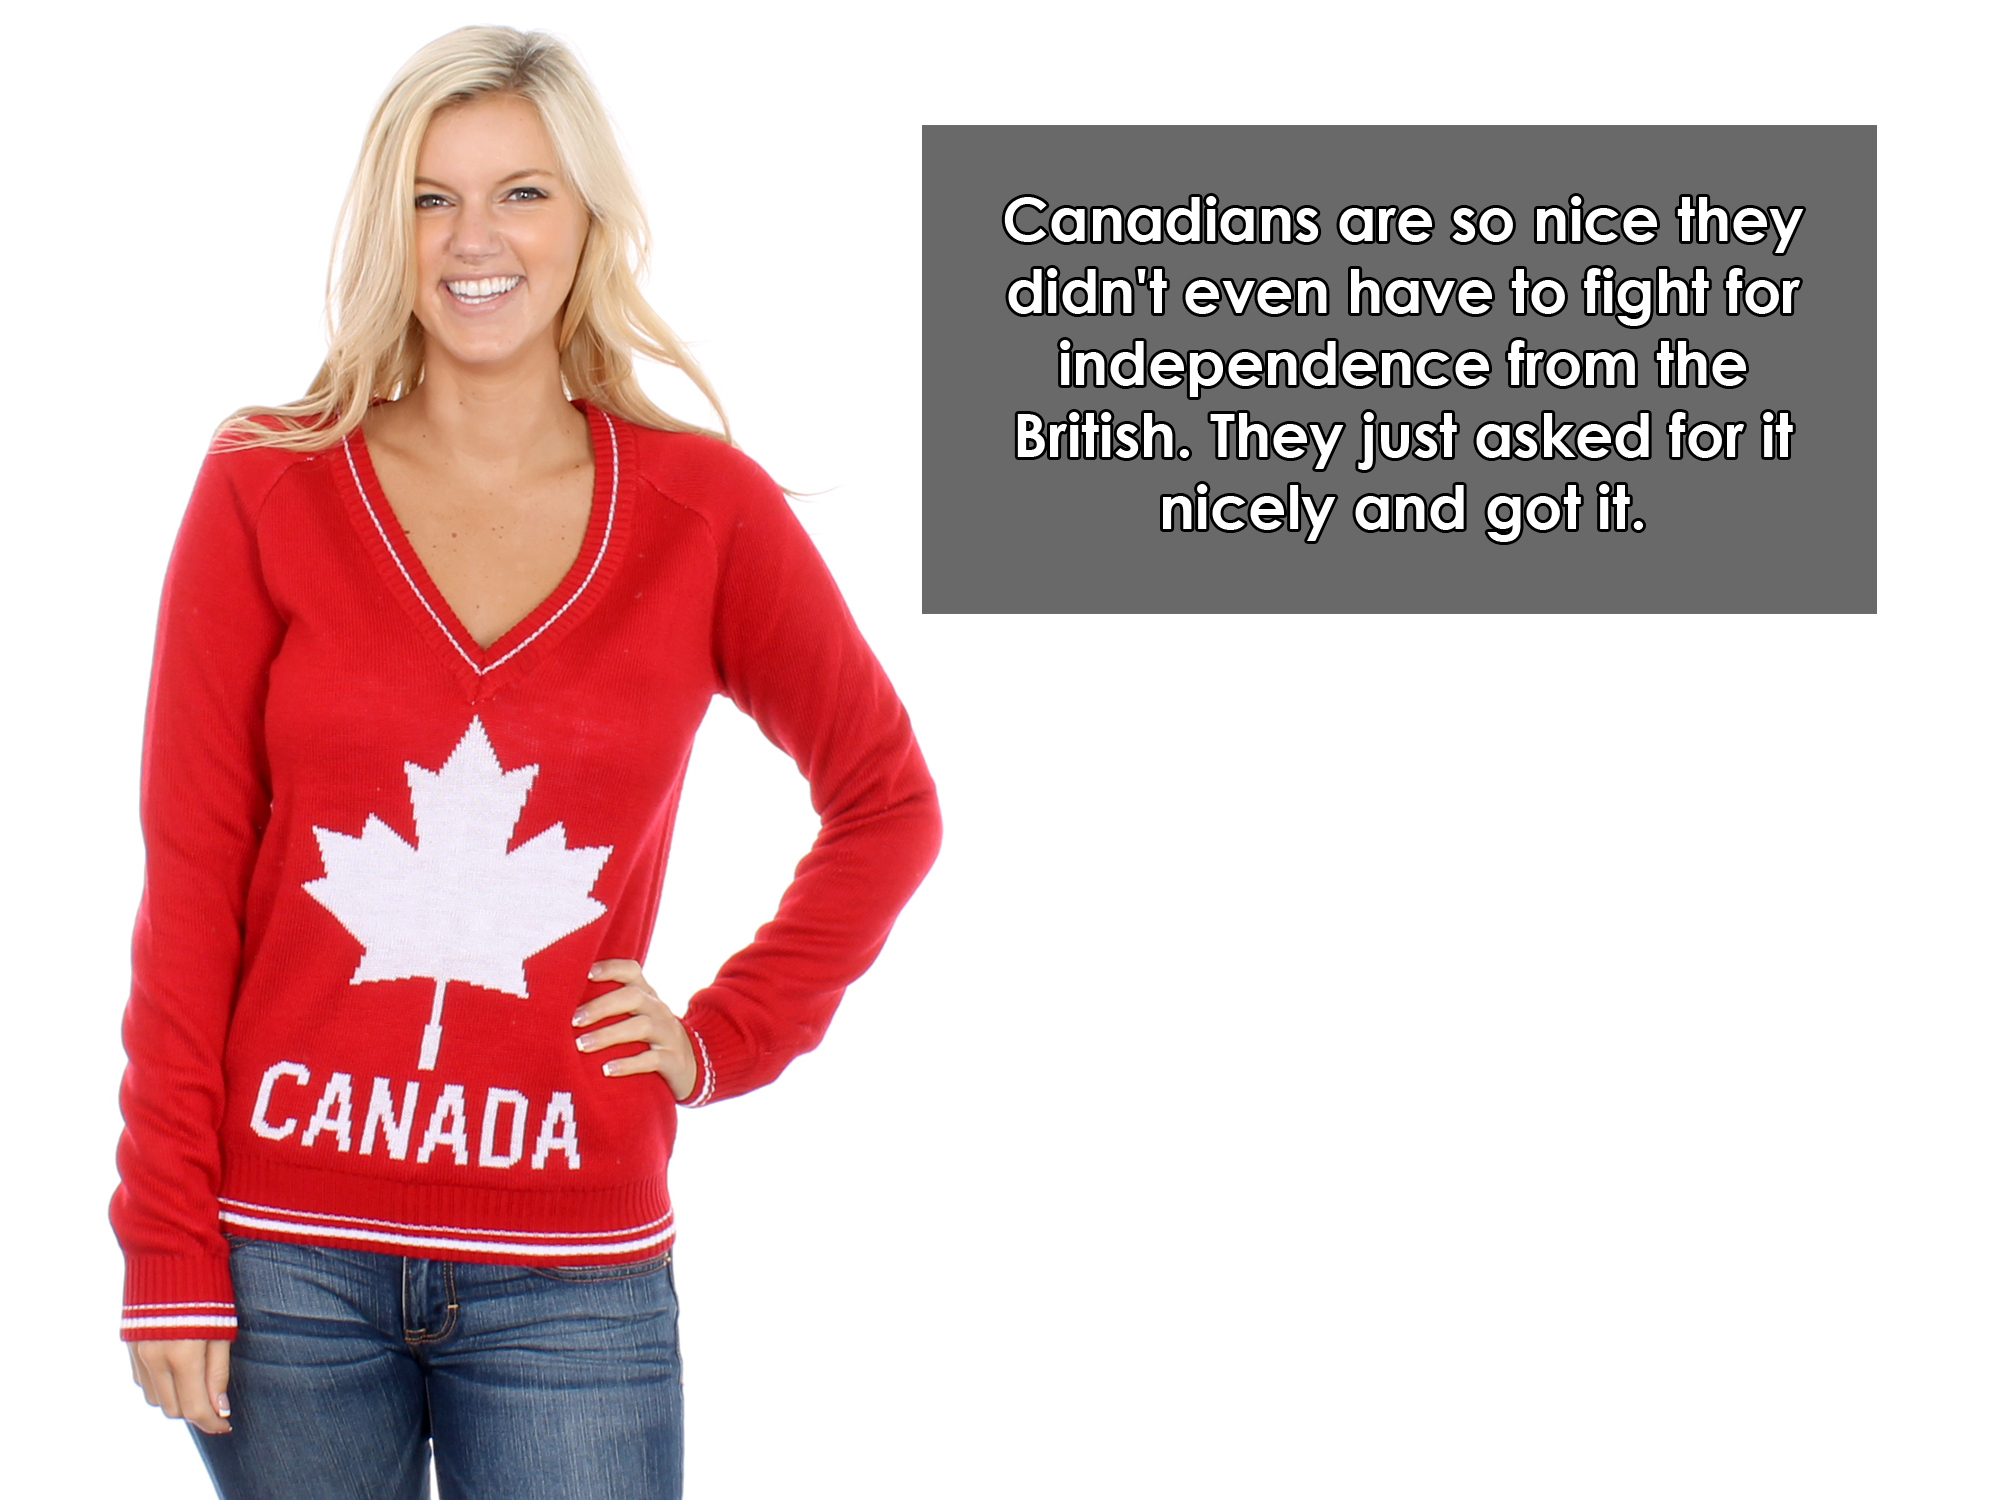 canada sweater - Canadians are so nice they didn't even have to fight for independence from the British. They just asked for it nicely and got it. Canada